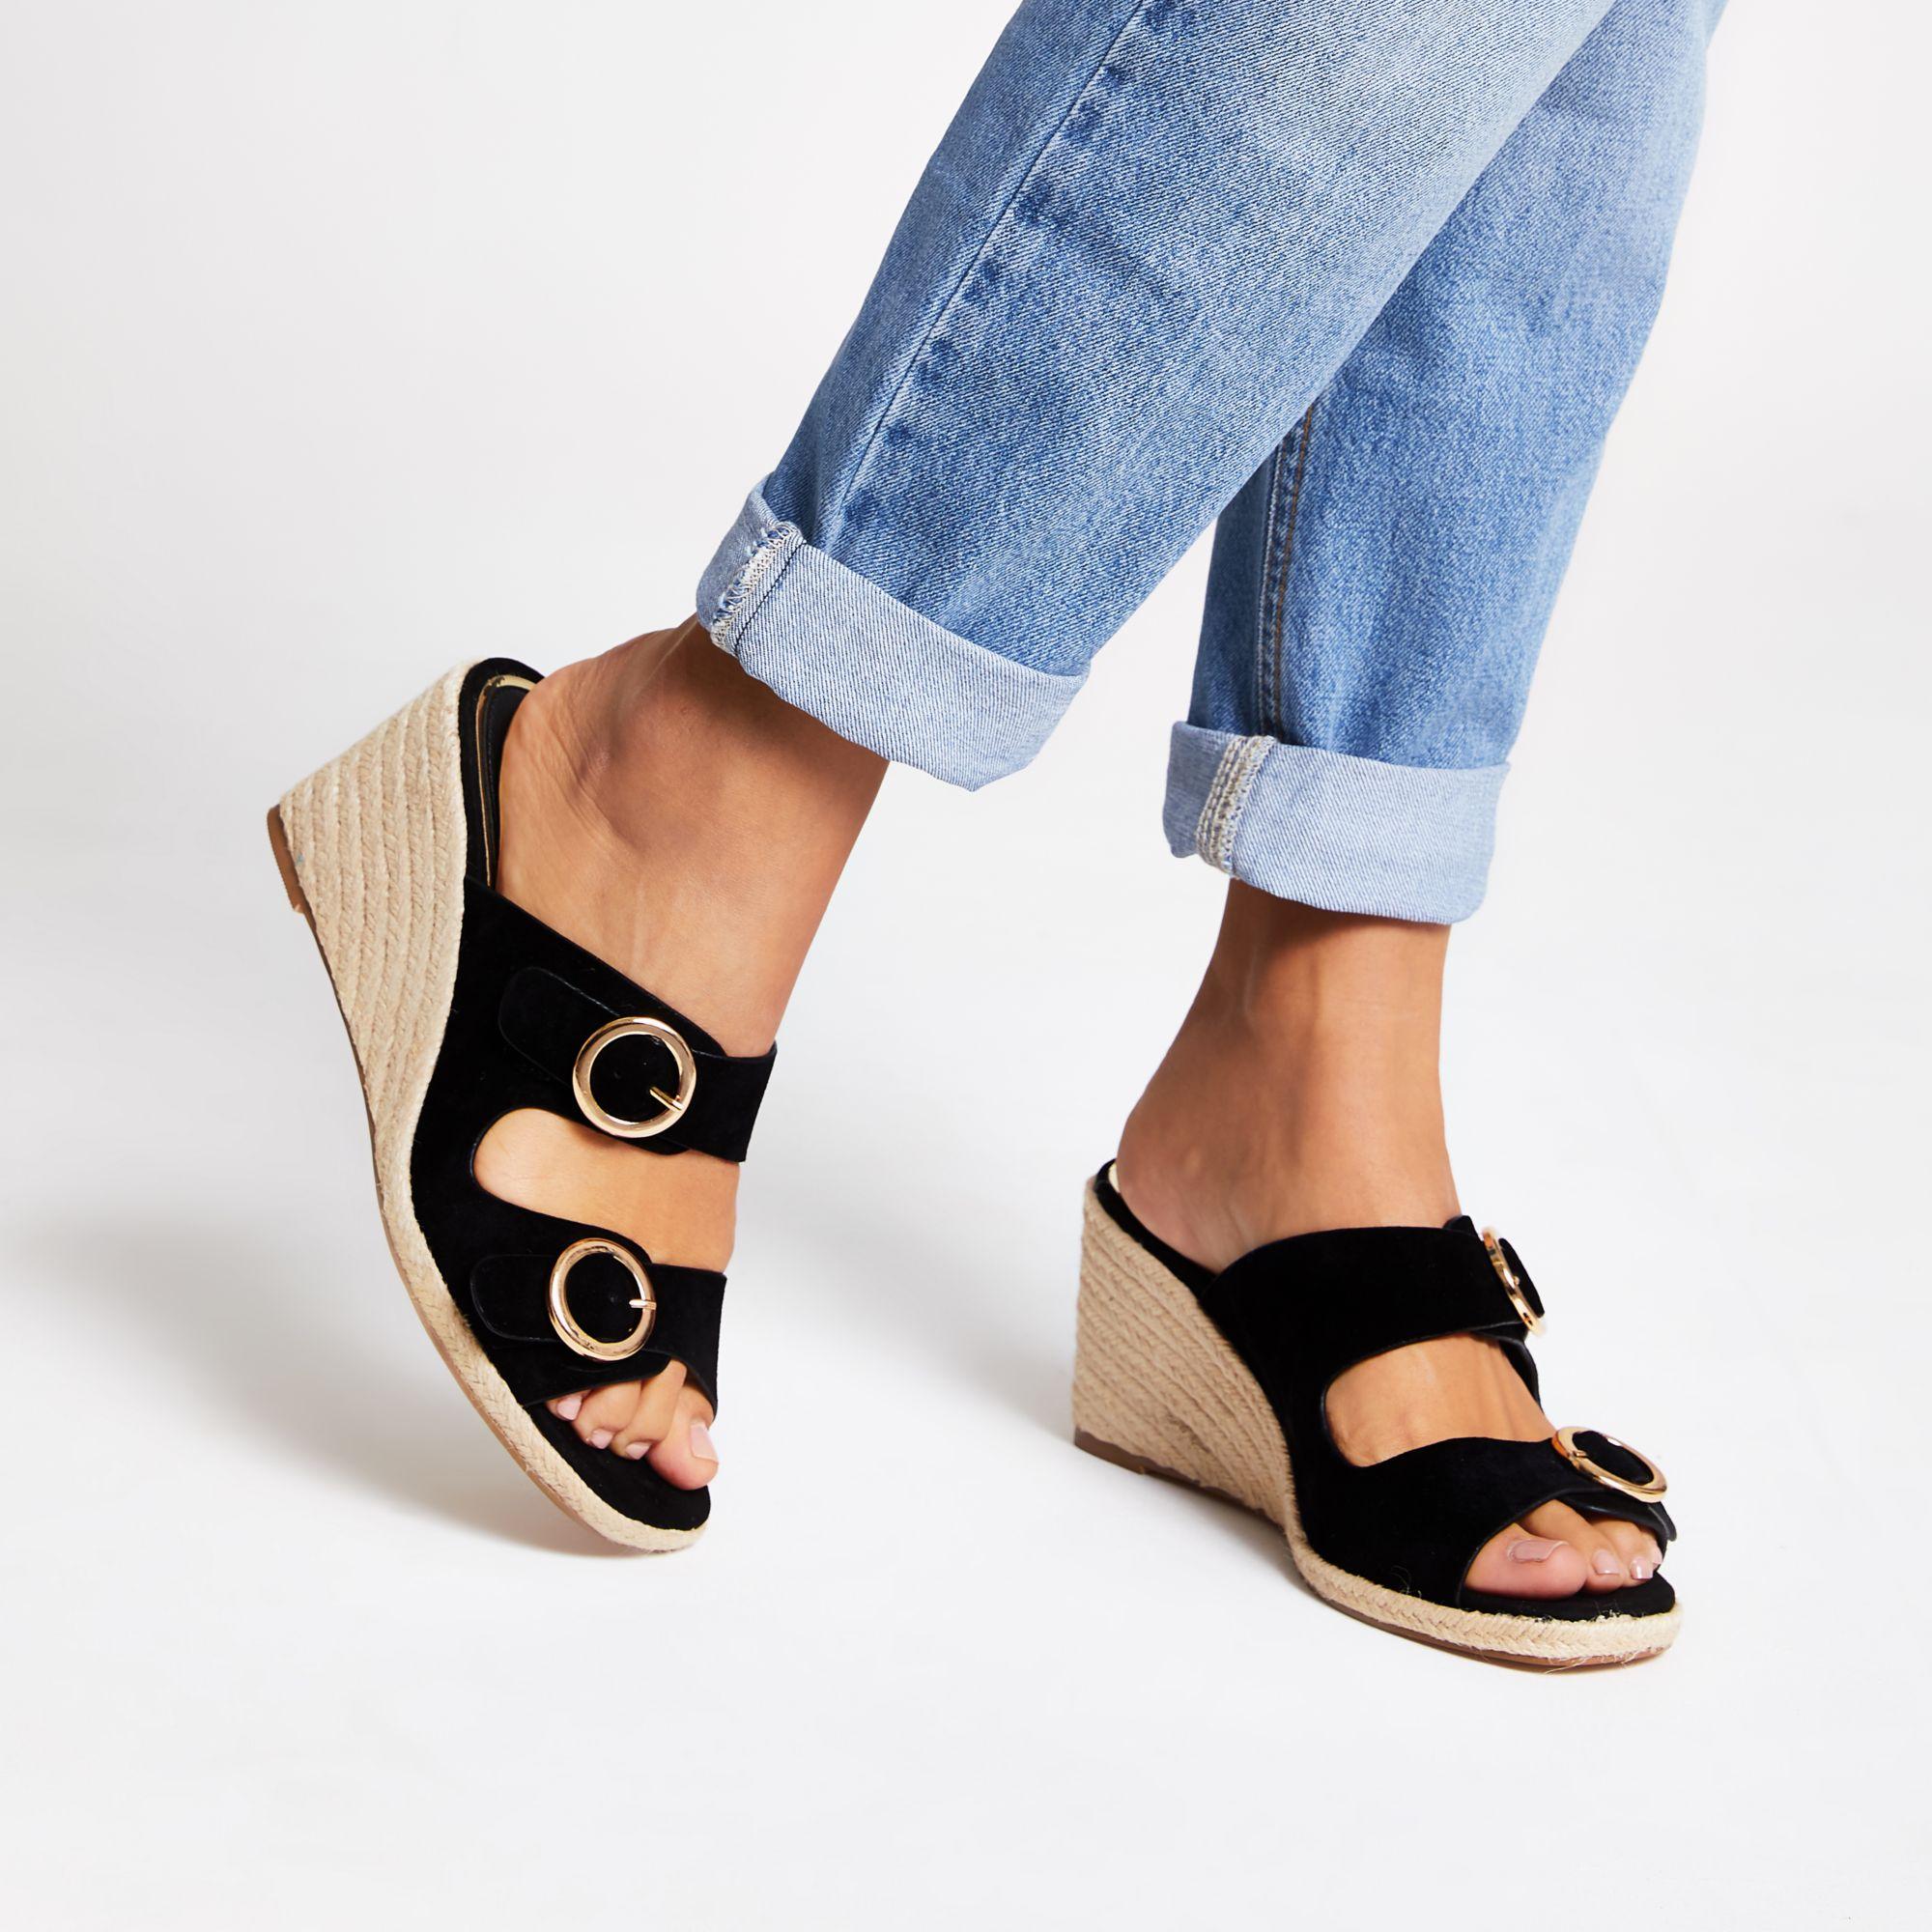 River Island Suede Buckle Square Toe Wedges in Black - Lyst